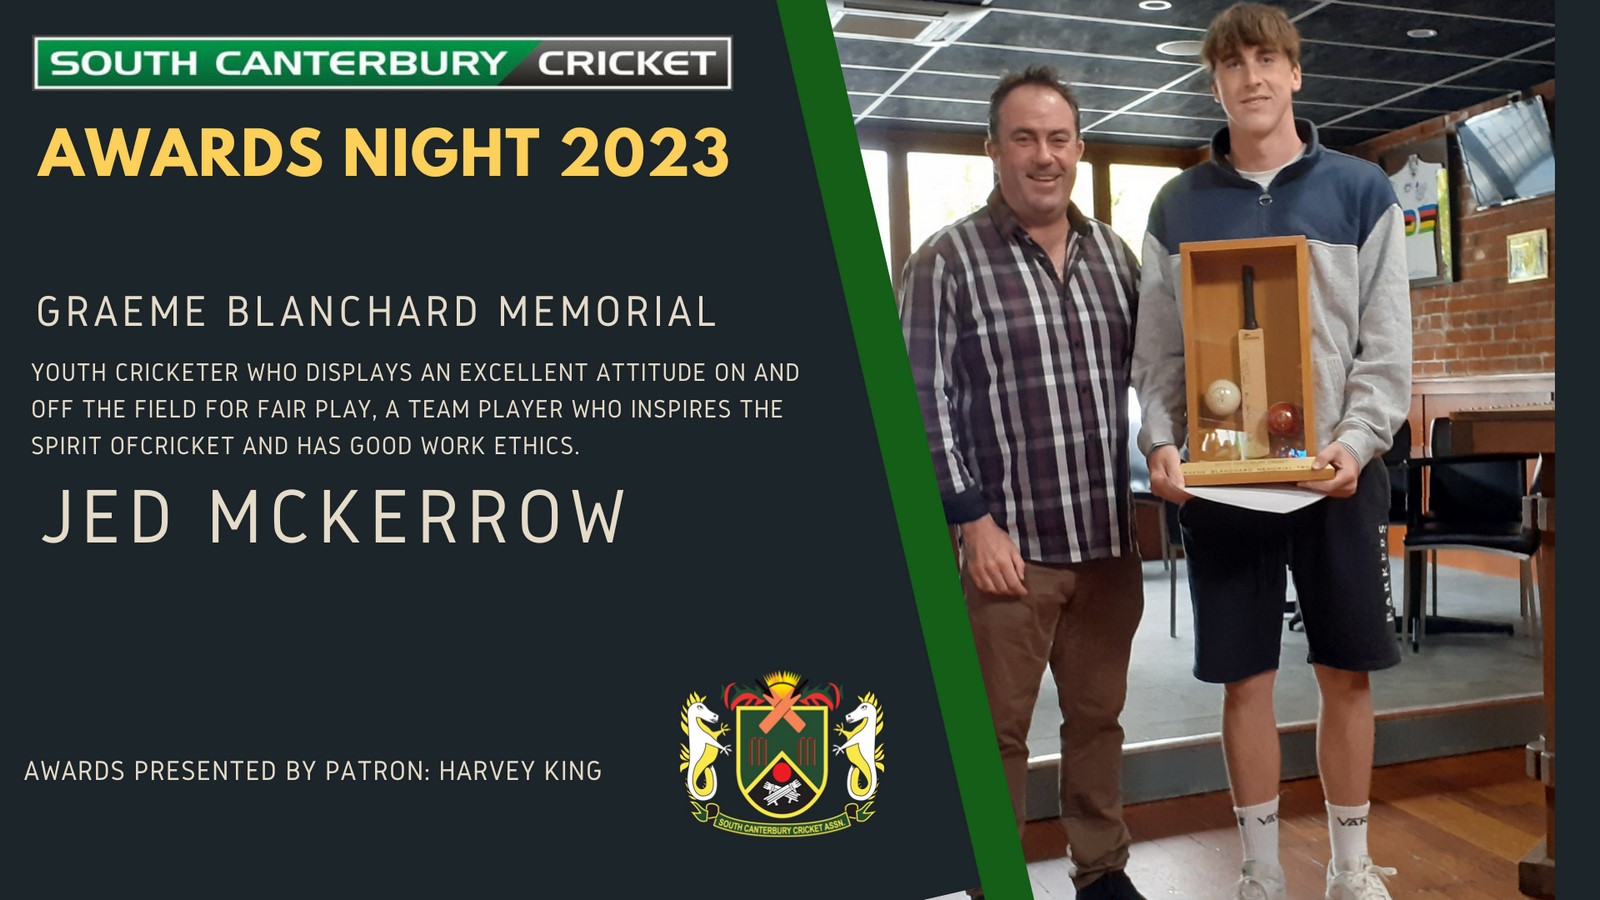 Graeme Blanchard Memorial Trophy won by Jed McKerrow and presented by Julian Blanchard